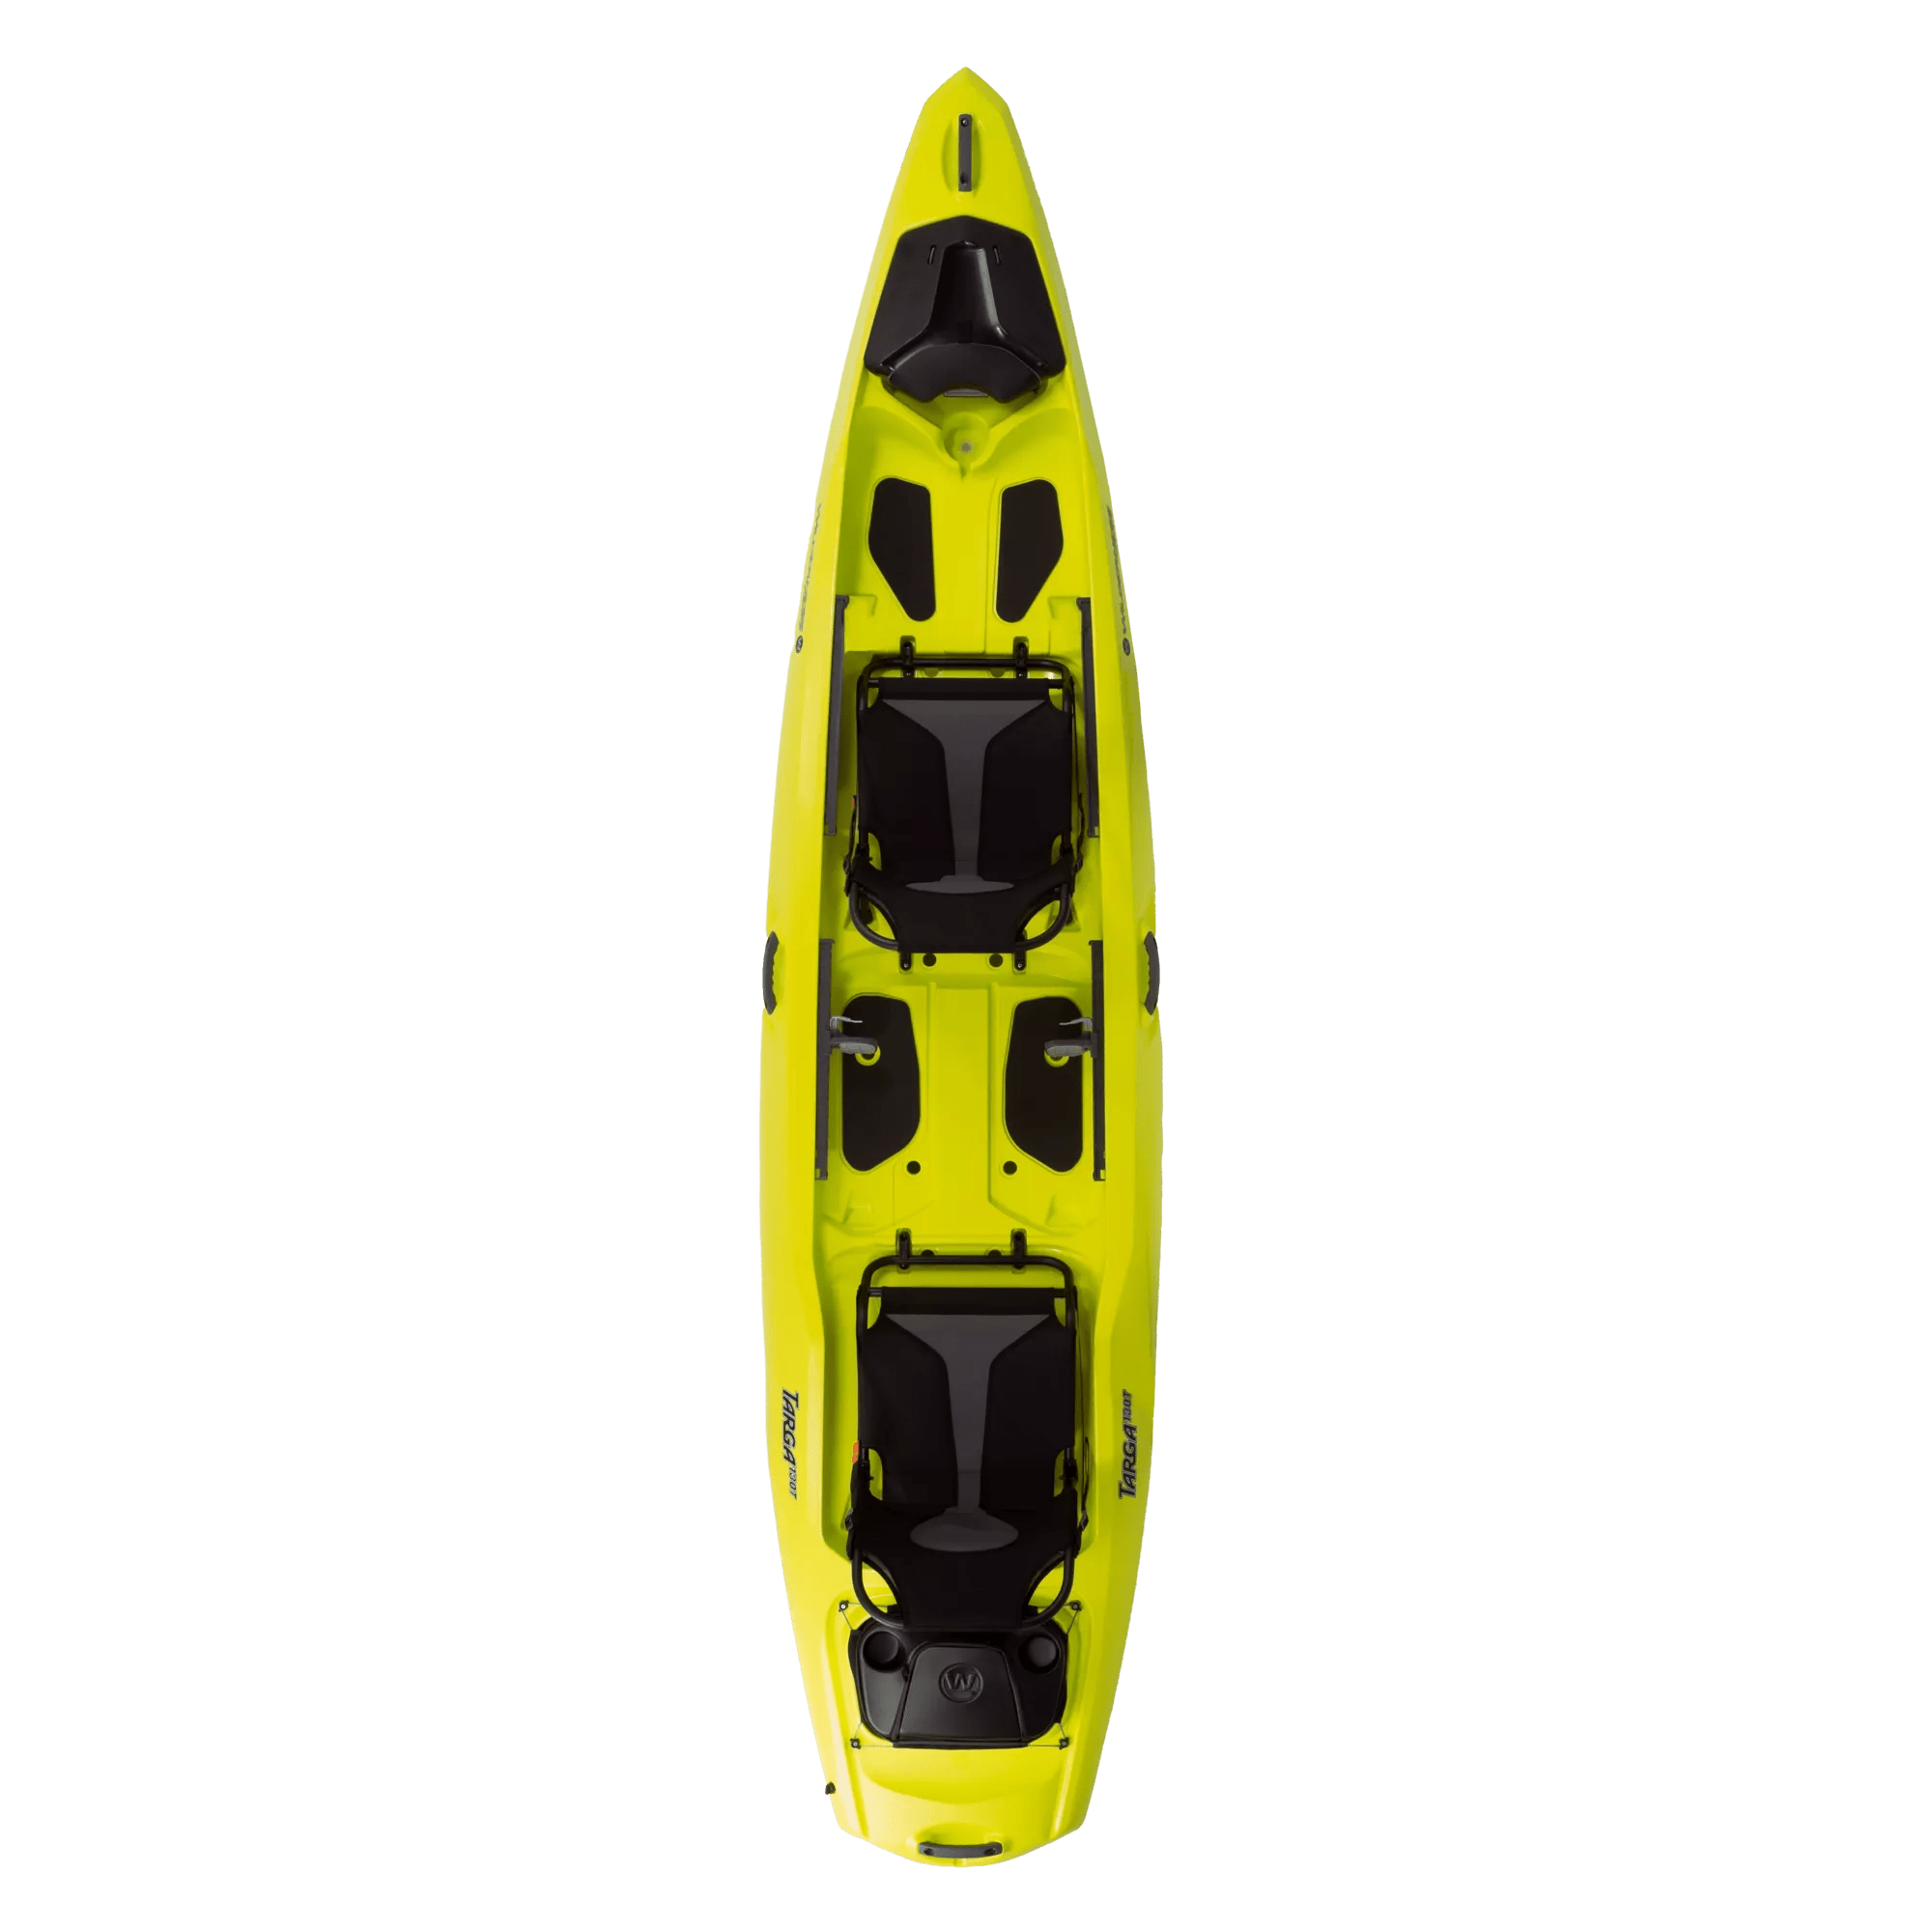 WILDERNESS SYSTEMS - Targa 130T Recreational Kayak - Discontinued color/model -  - 9751133180 - TOP 